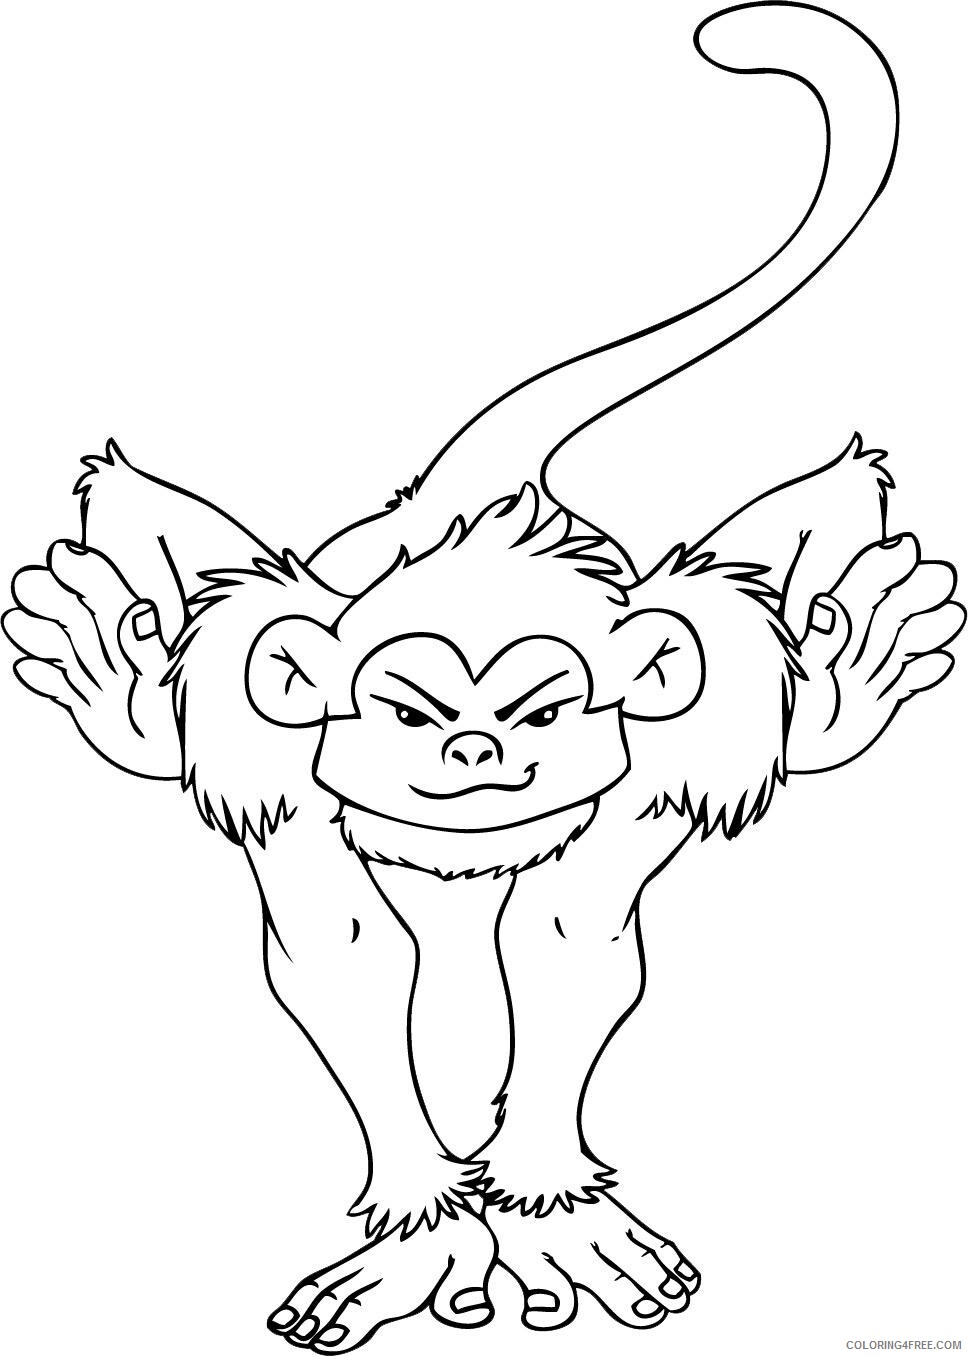 Monkey Coloring Pages Animal Printable Sheets Spider Monkey 2021 3361 Coloring4free